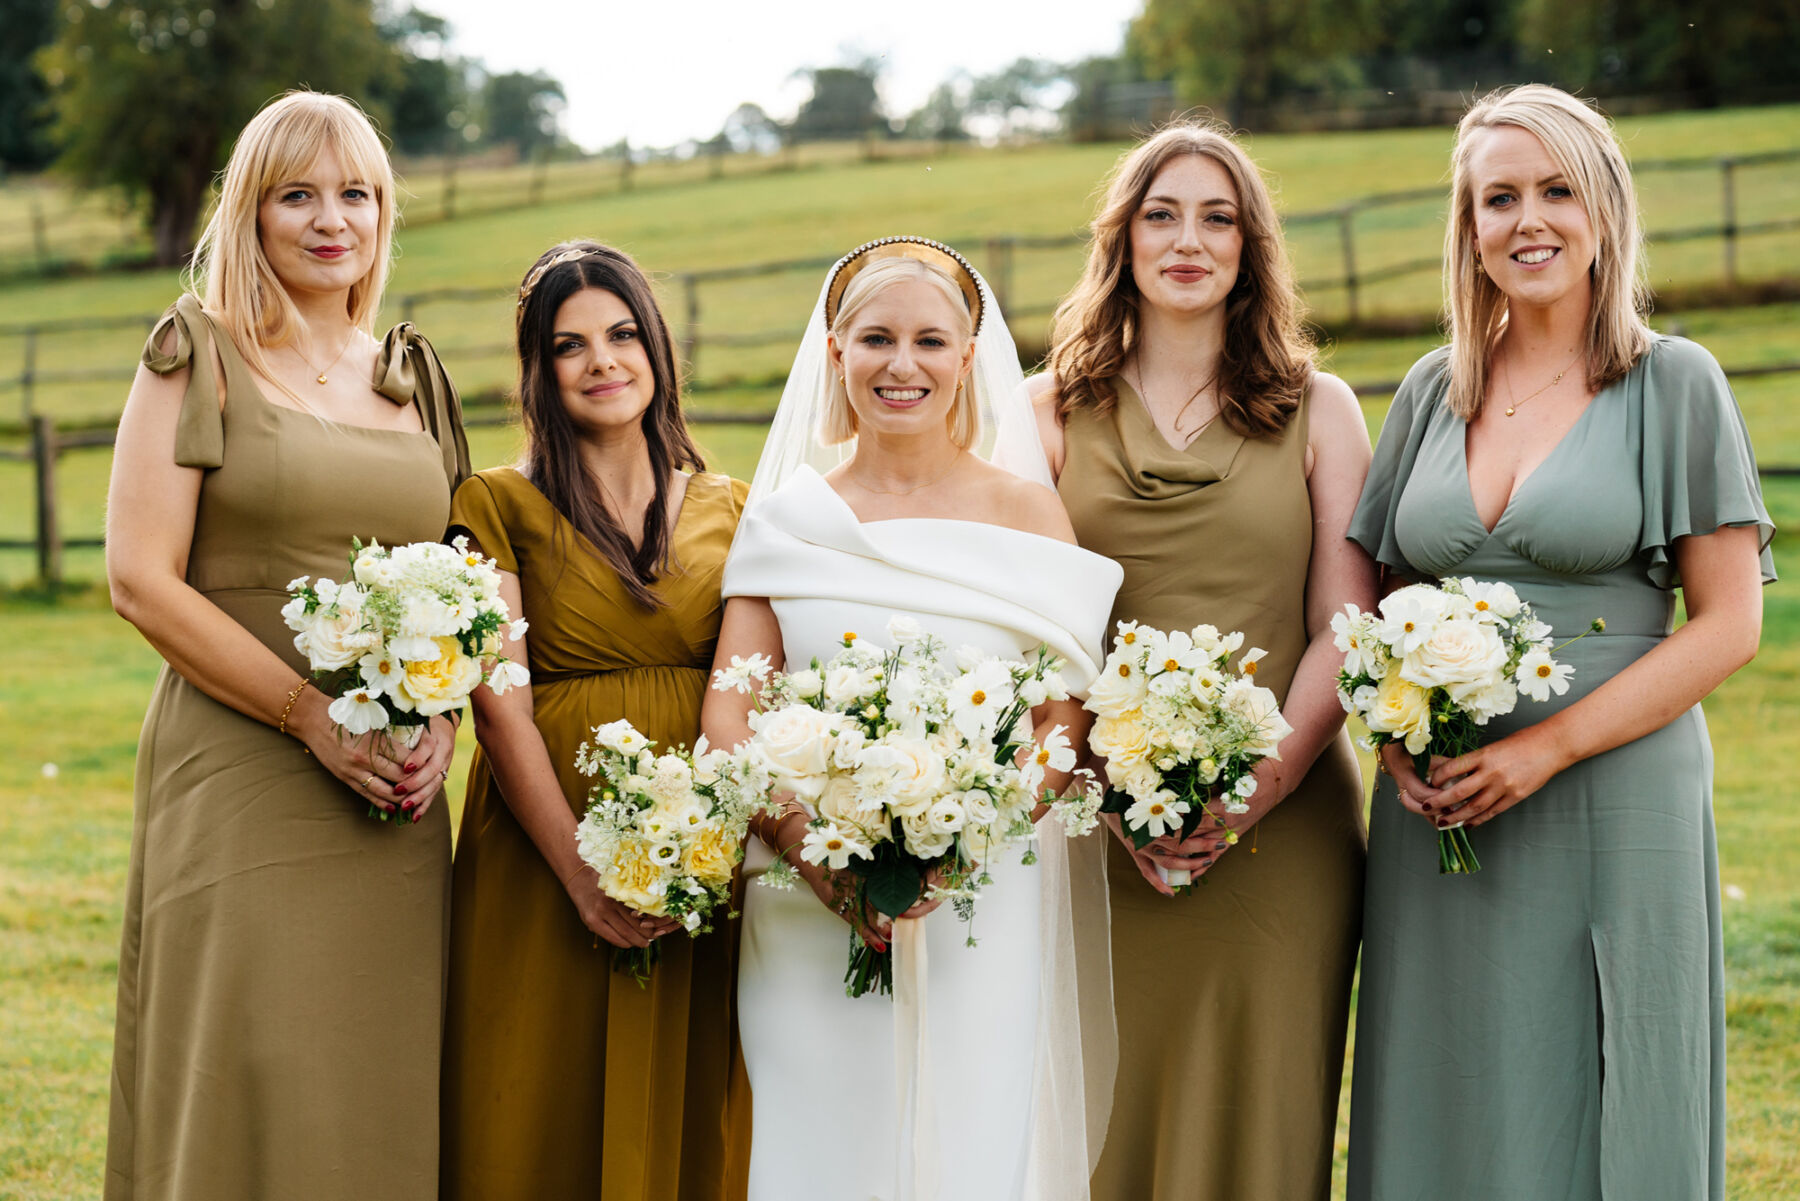 Bride wearing Tony Maticevski wedding dress & modern gold headpiece. Bridesmaids in olive green and green dresses.